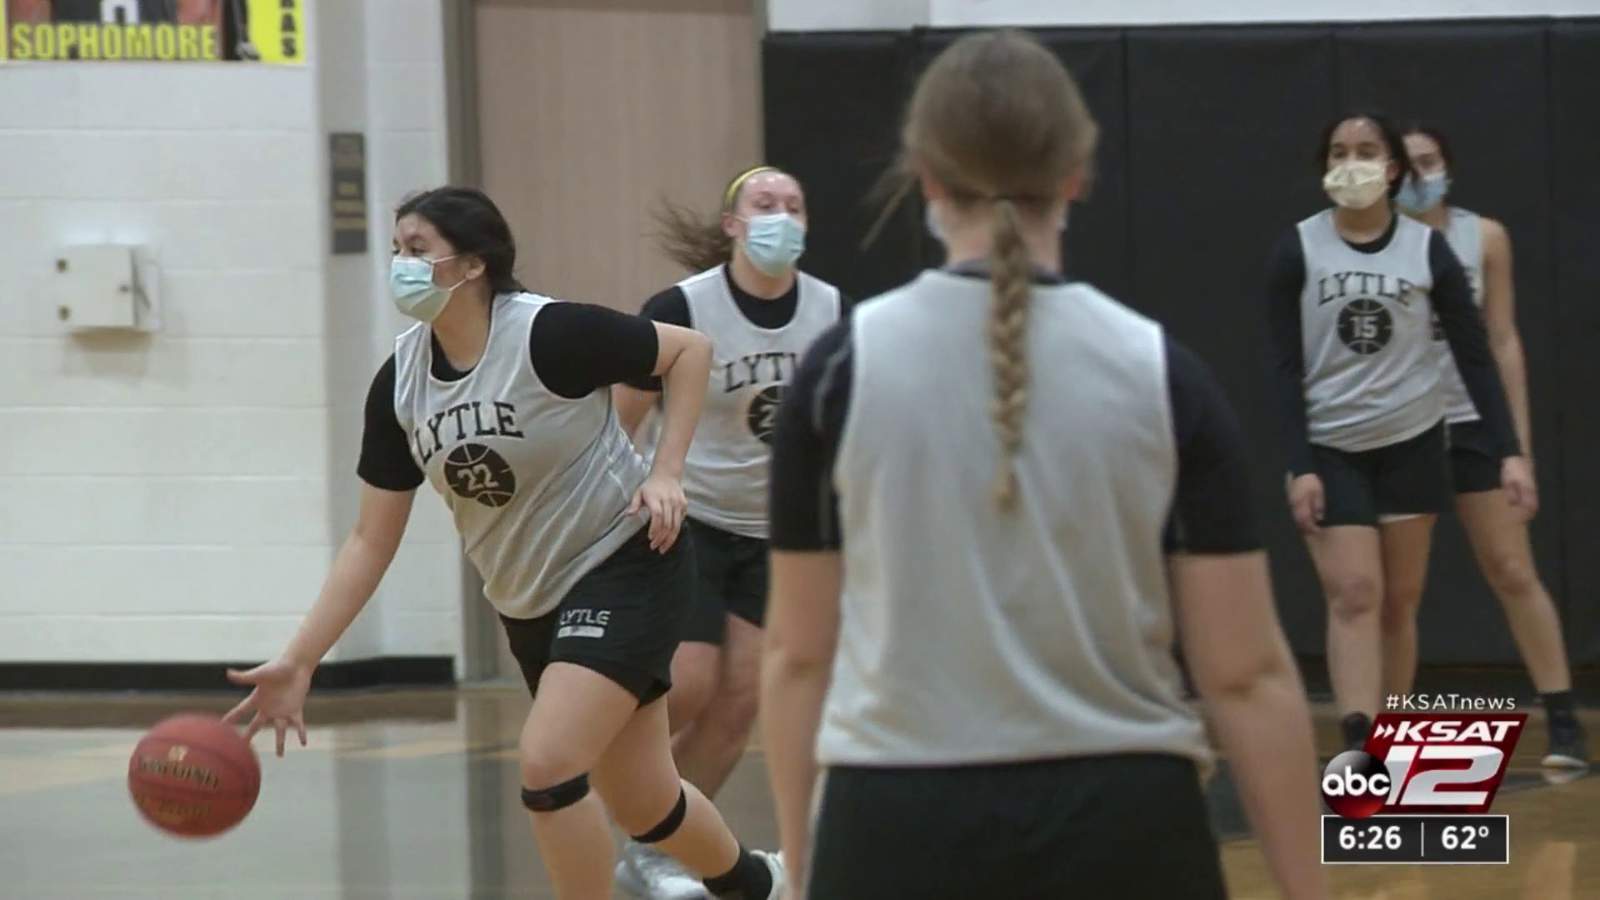 Lytle Lady Pirates looking to finish season undefeated in district